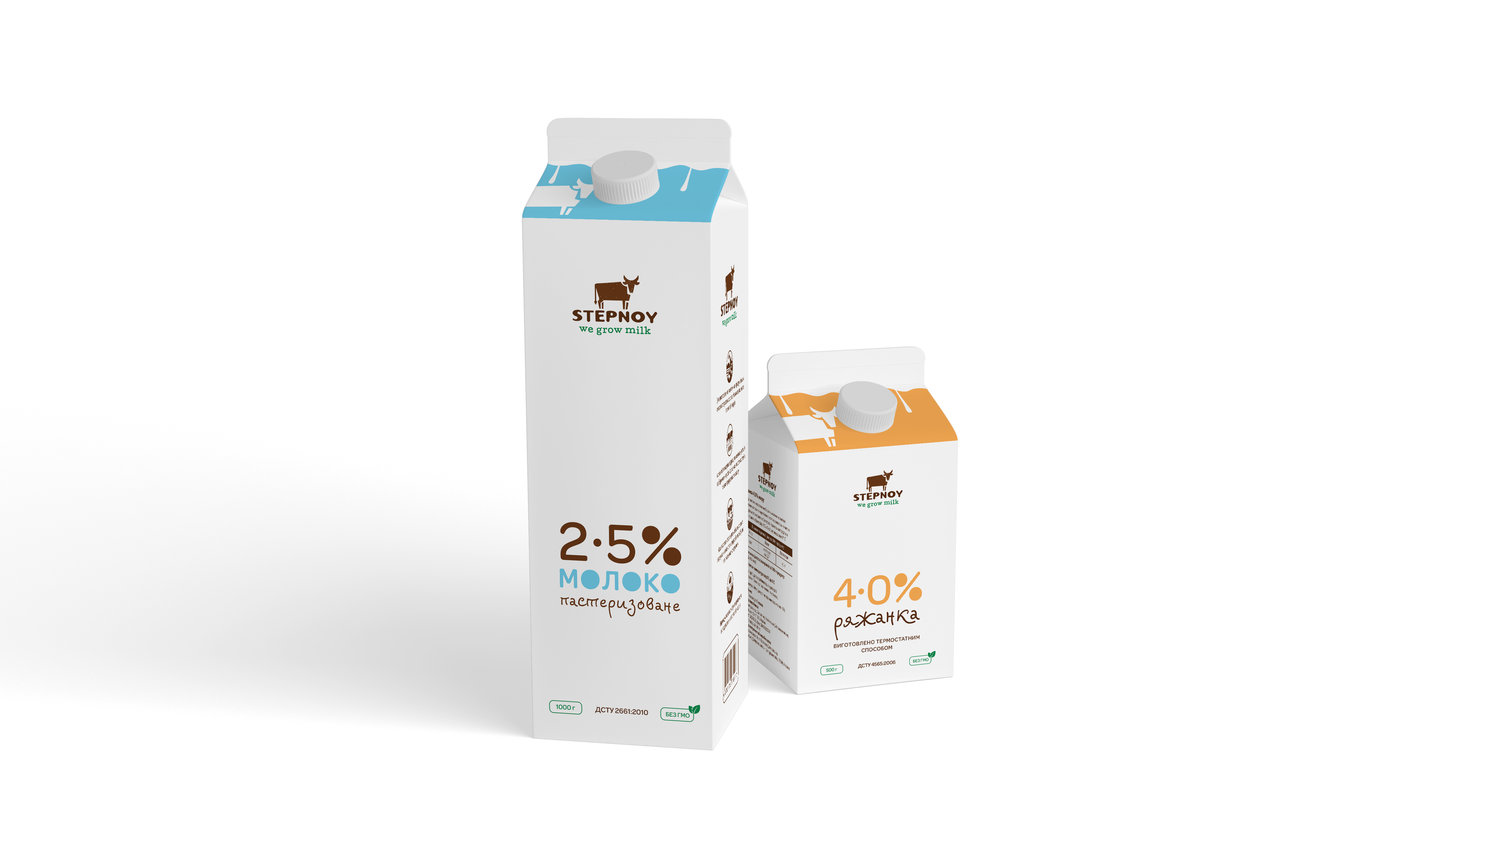 Redesign of Packaging for the Line of Dairy Products of the Stepnoy Trademark